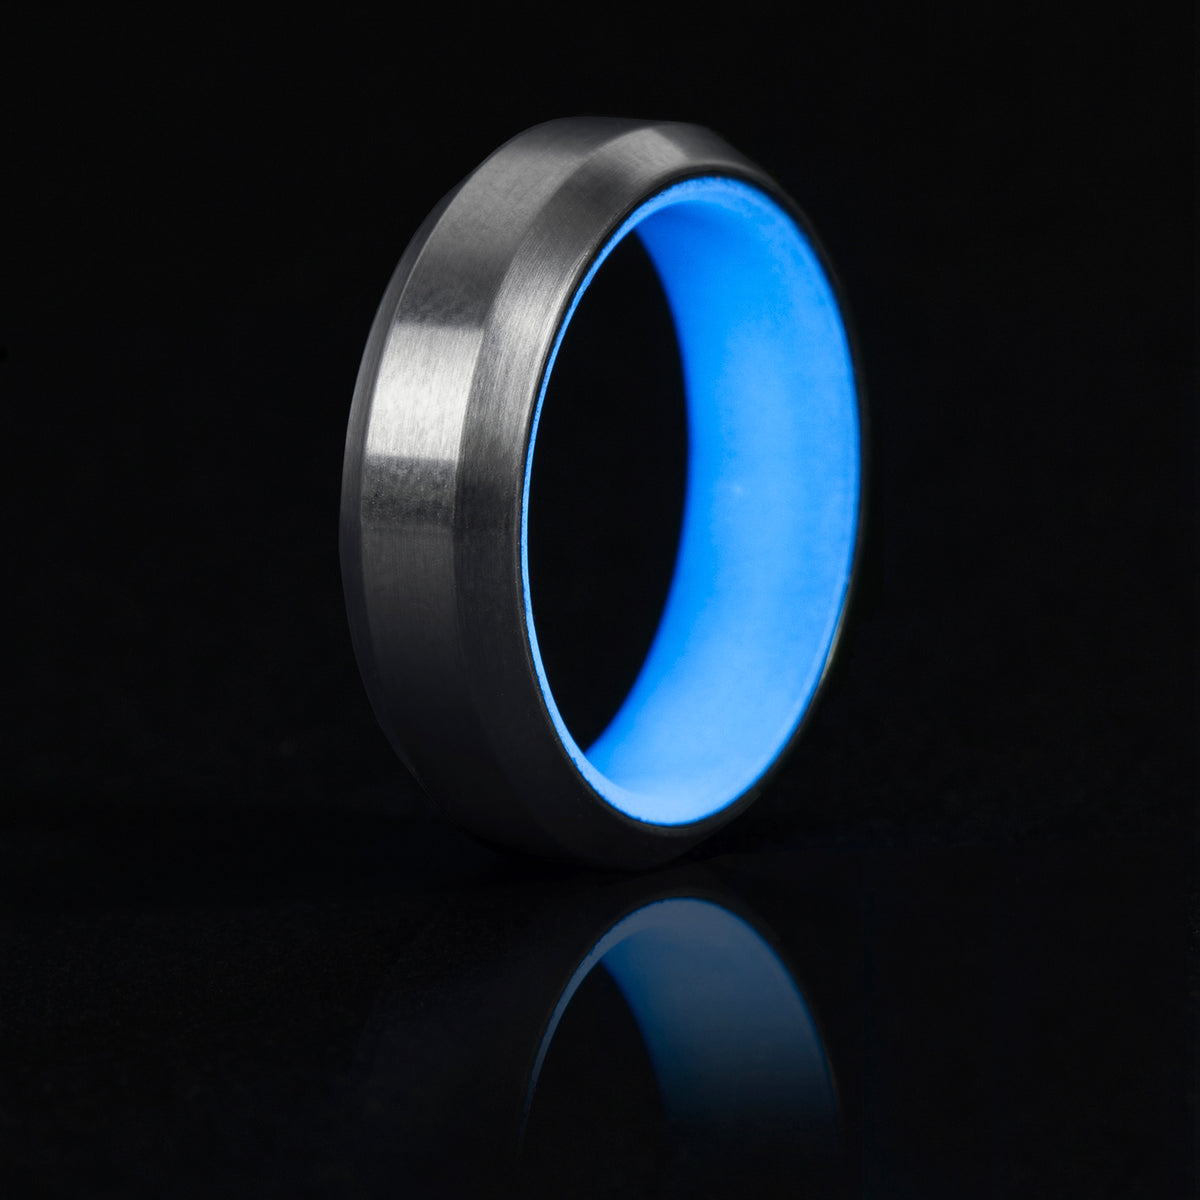 Blue glow ring with titanium exterior and beveled edges.